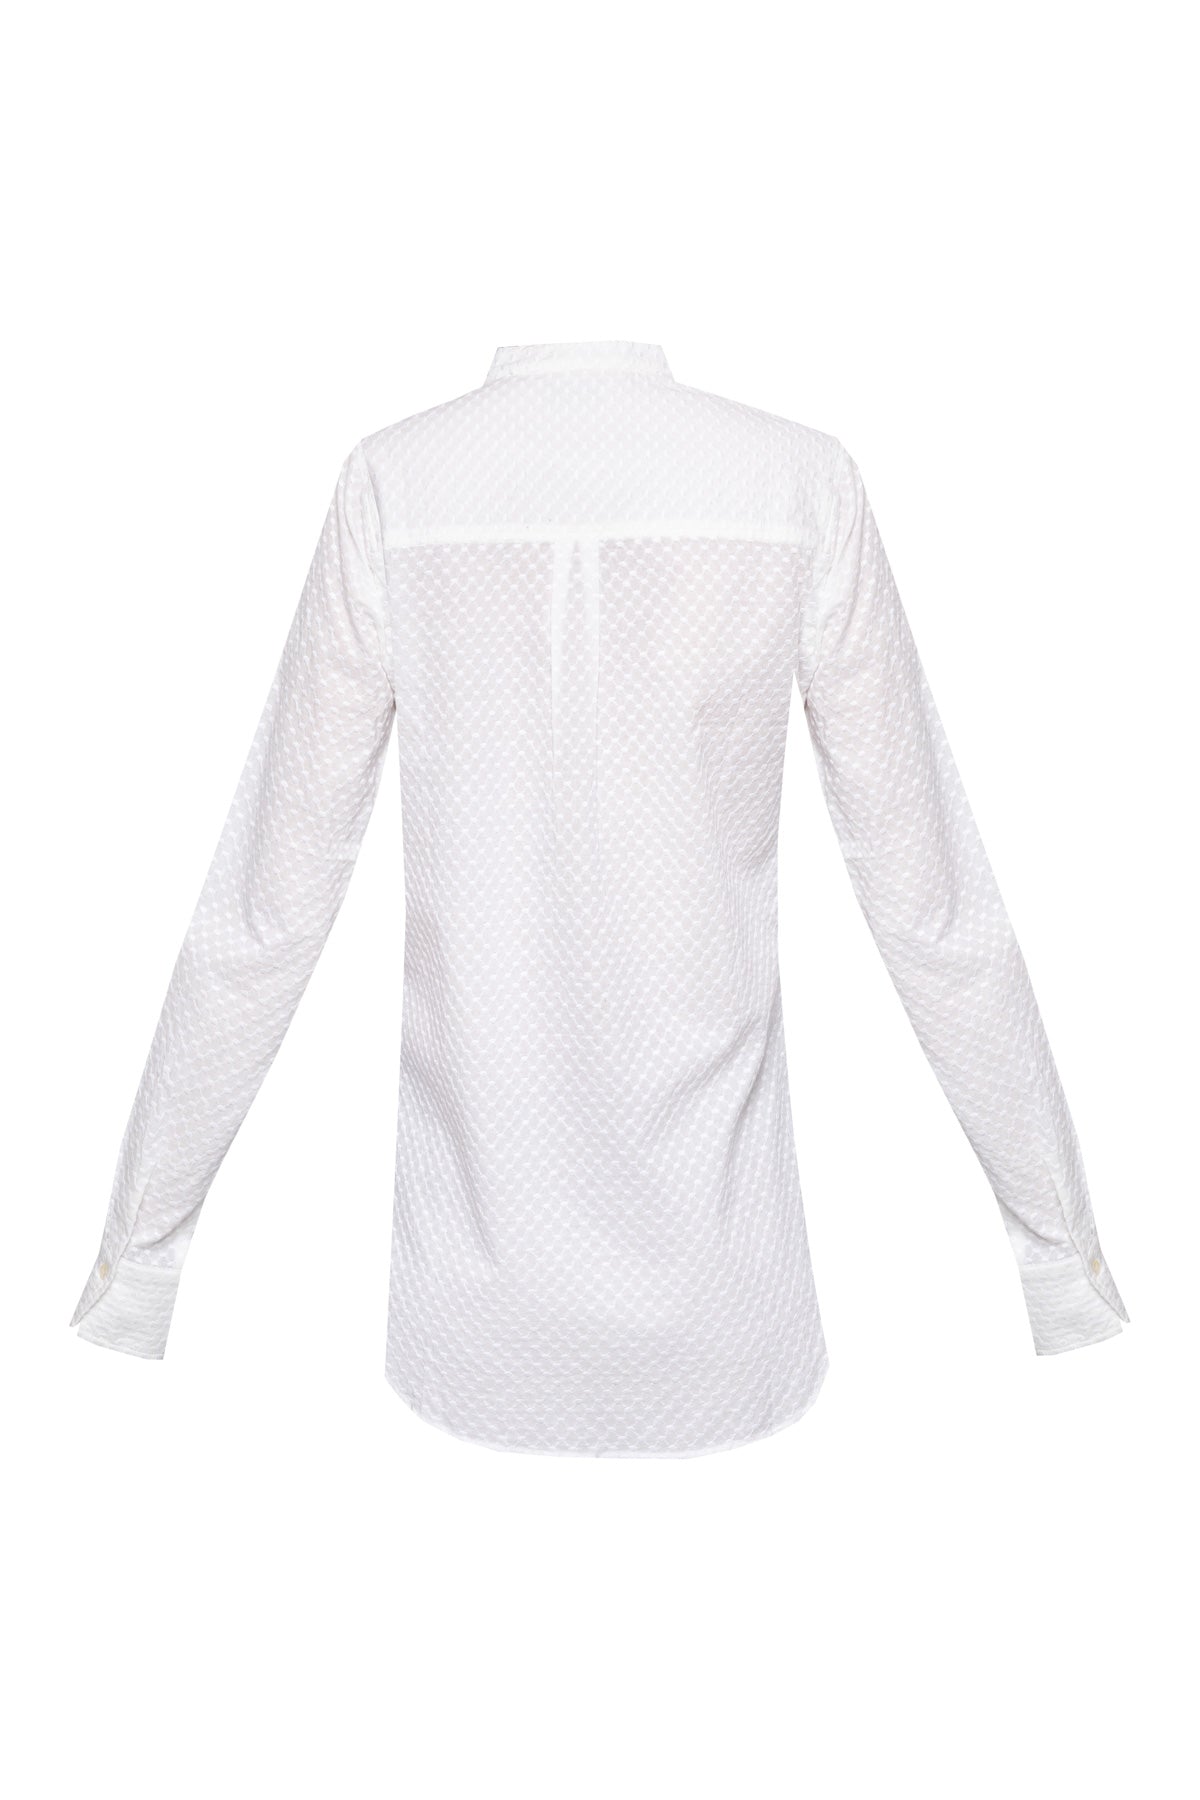 Women's Cotton Shirt - White Embroidered Dots